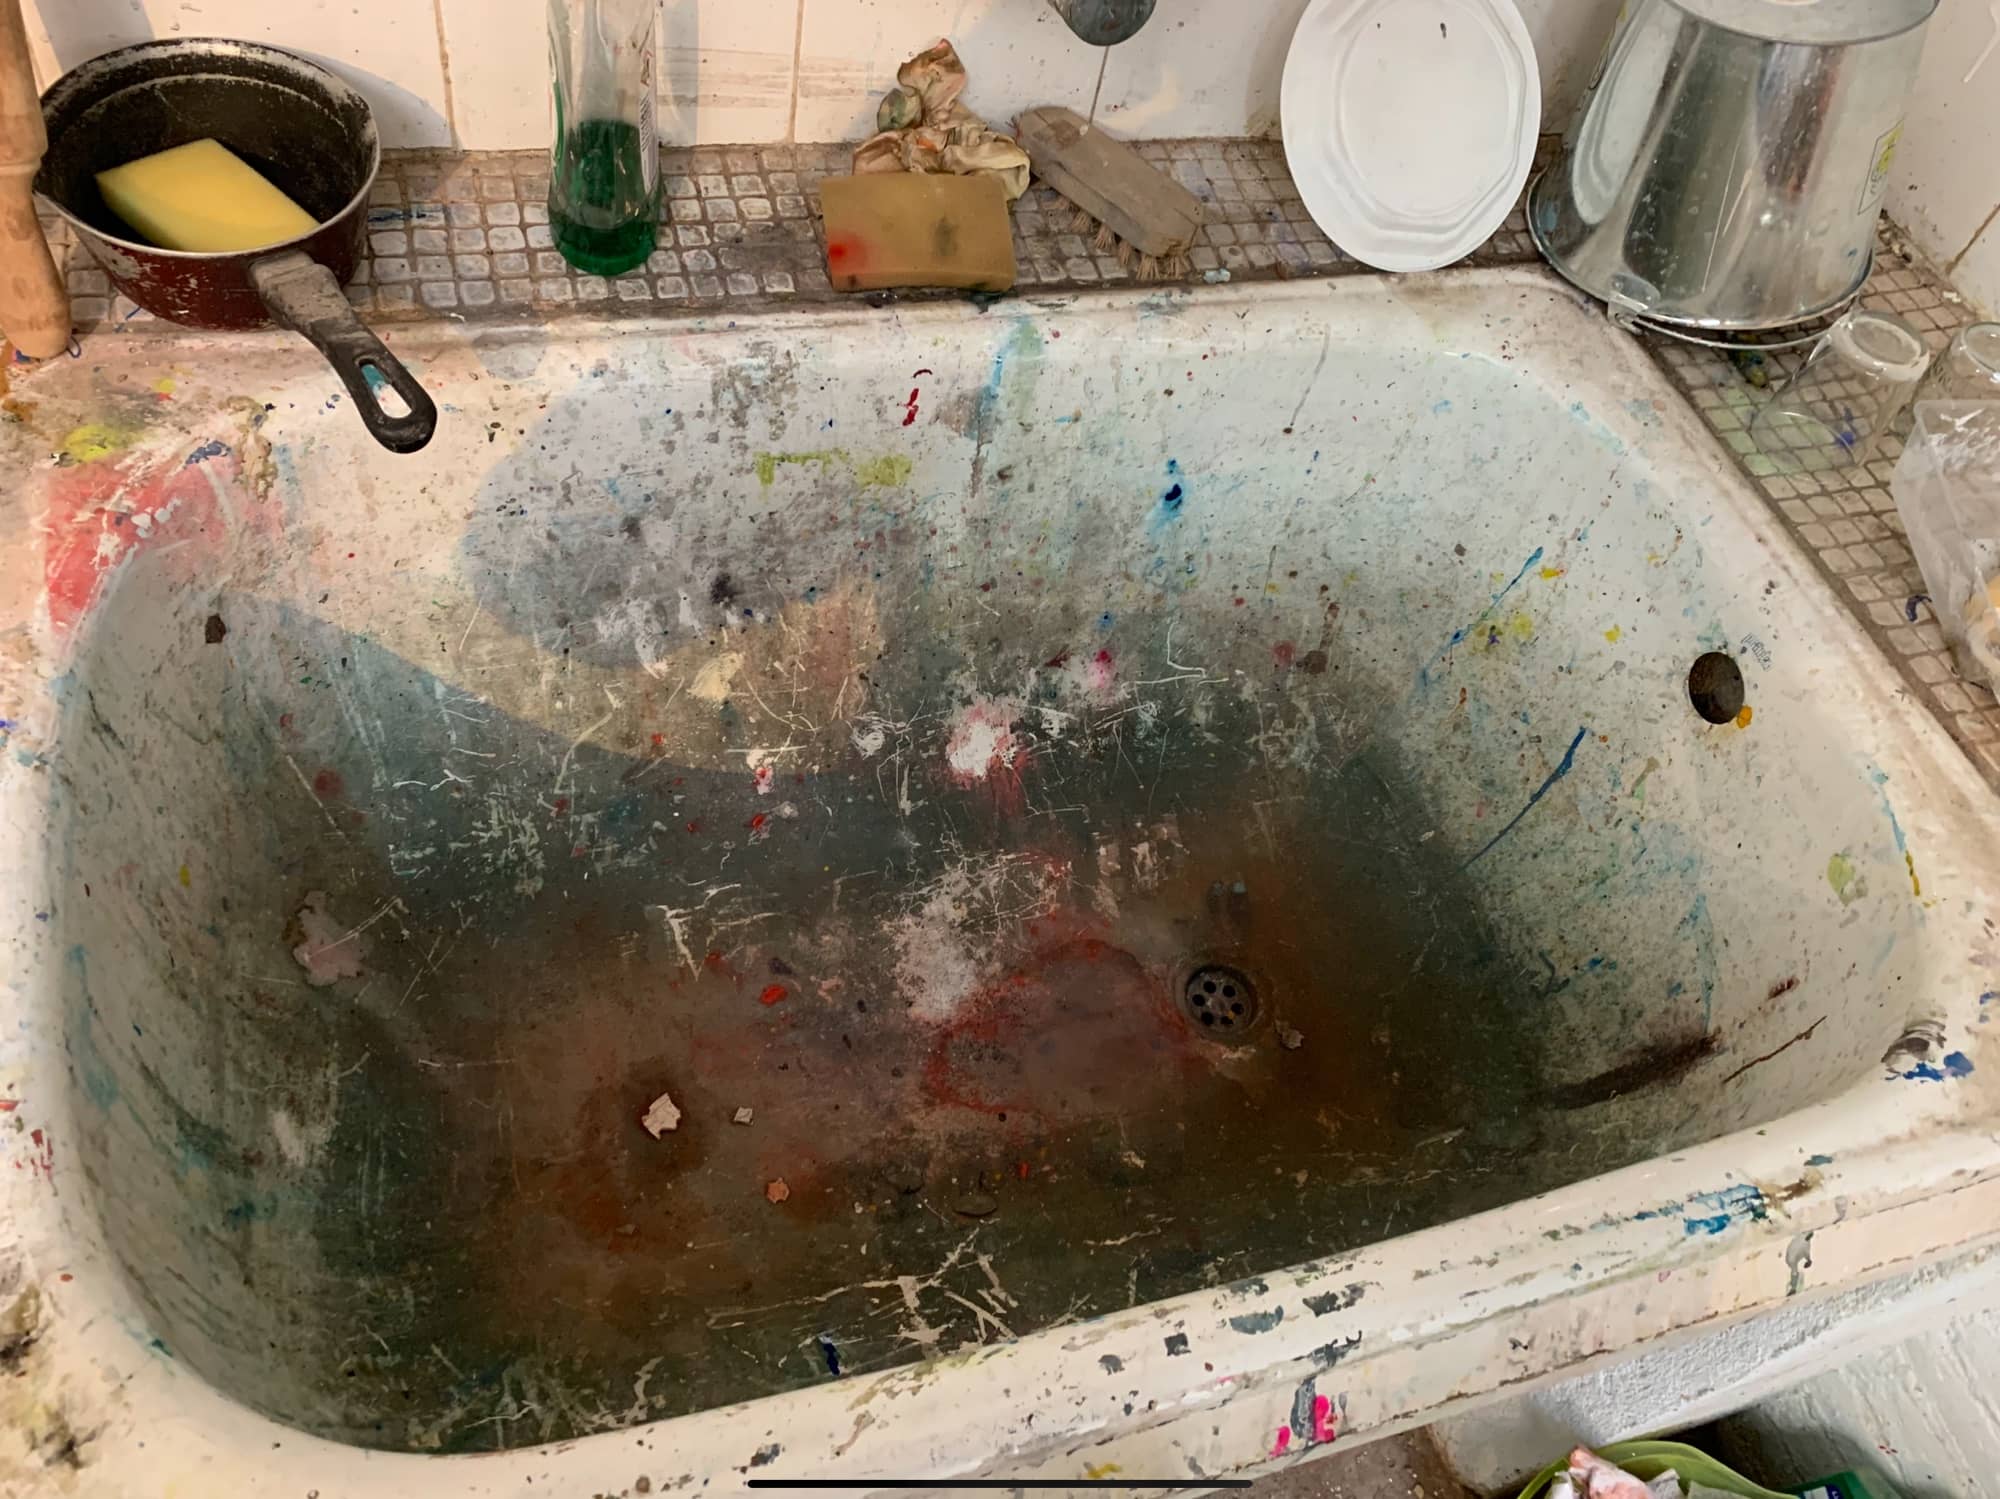 This painter’s sink could be a little punchier.